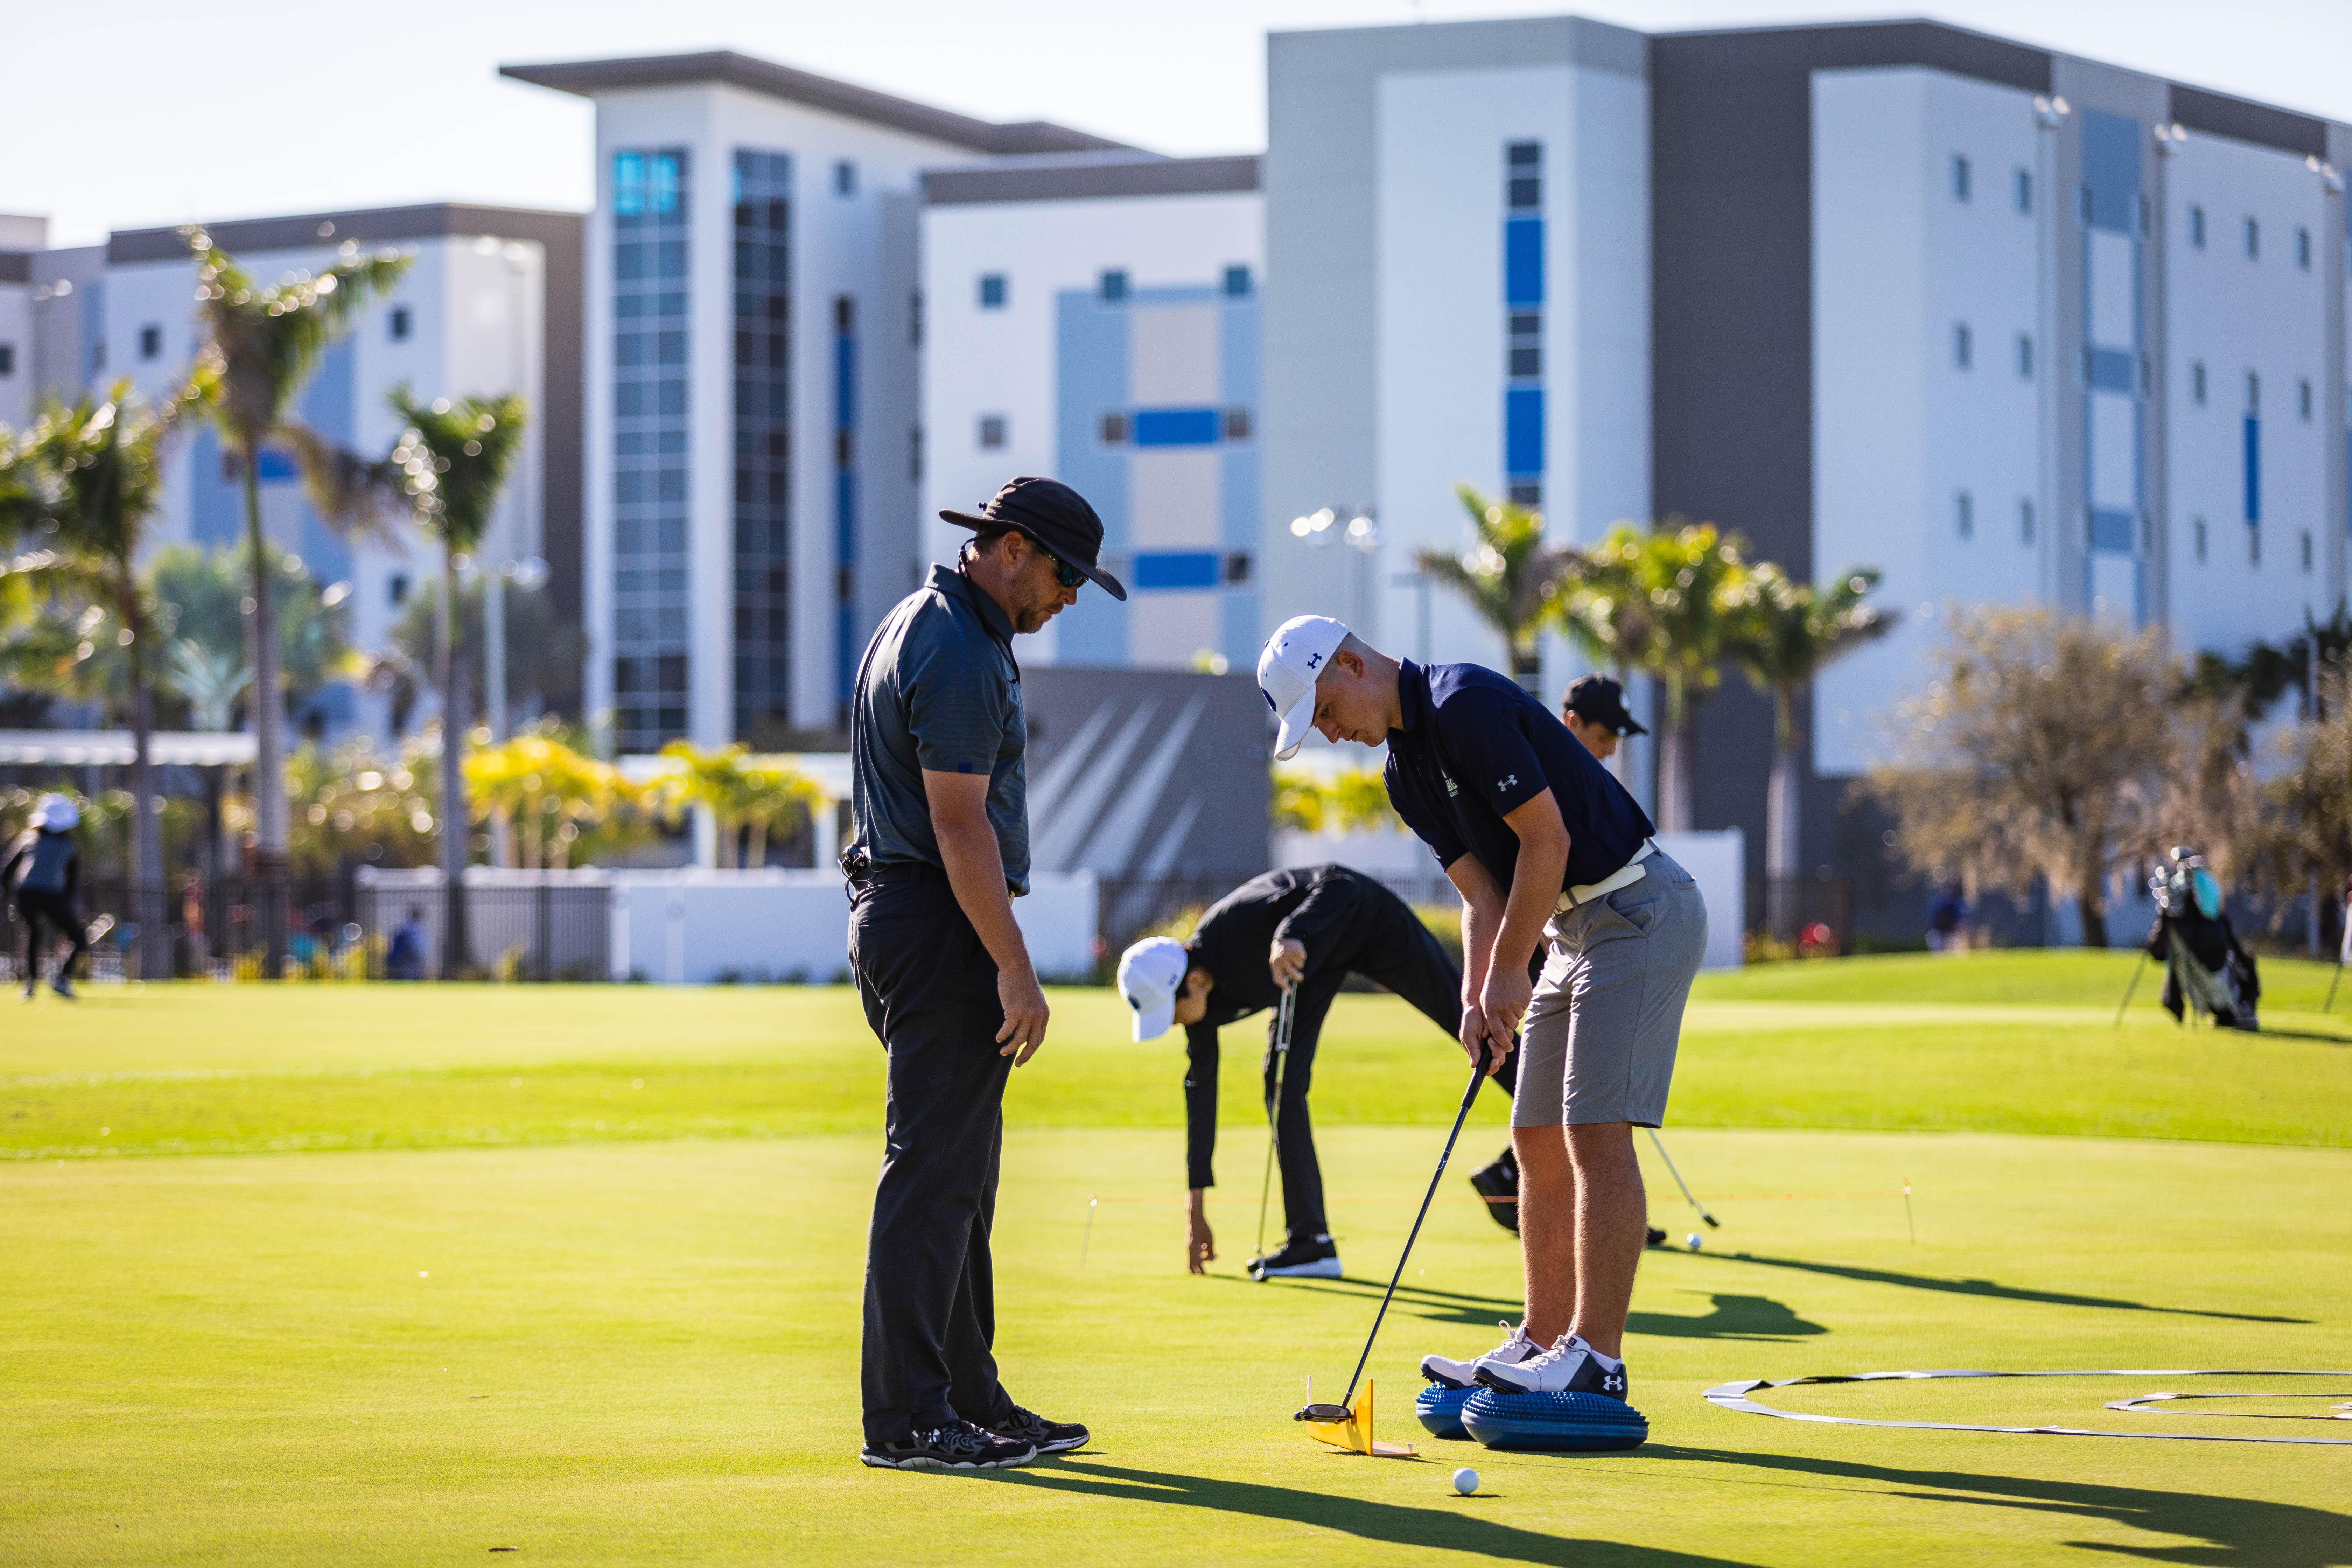 IMG Academy golf camper learning how to putt with coach